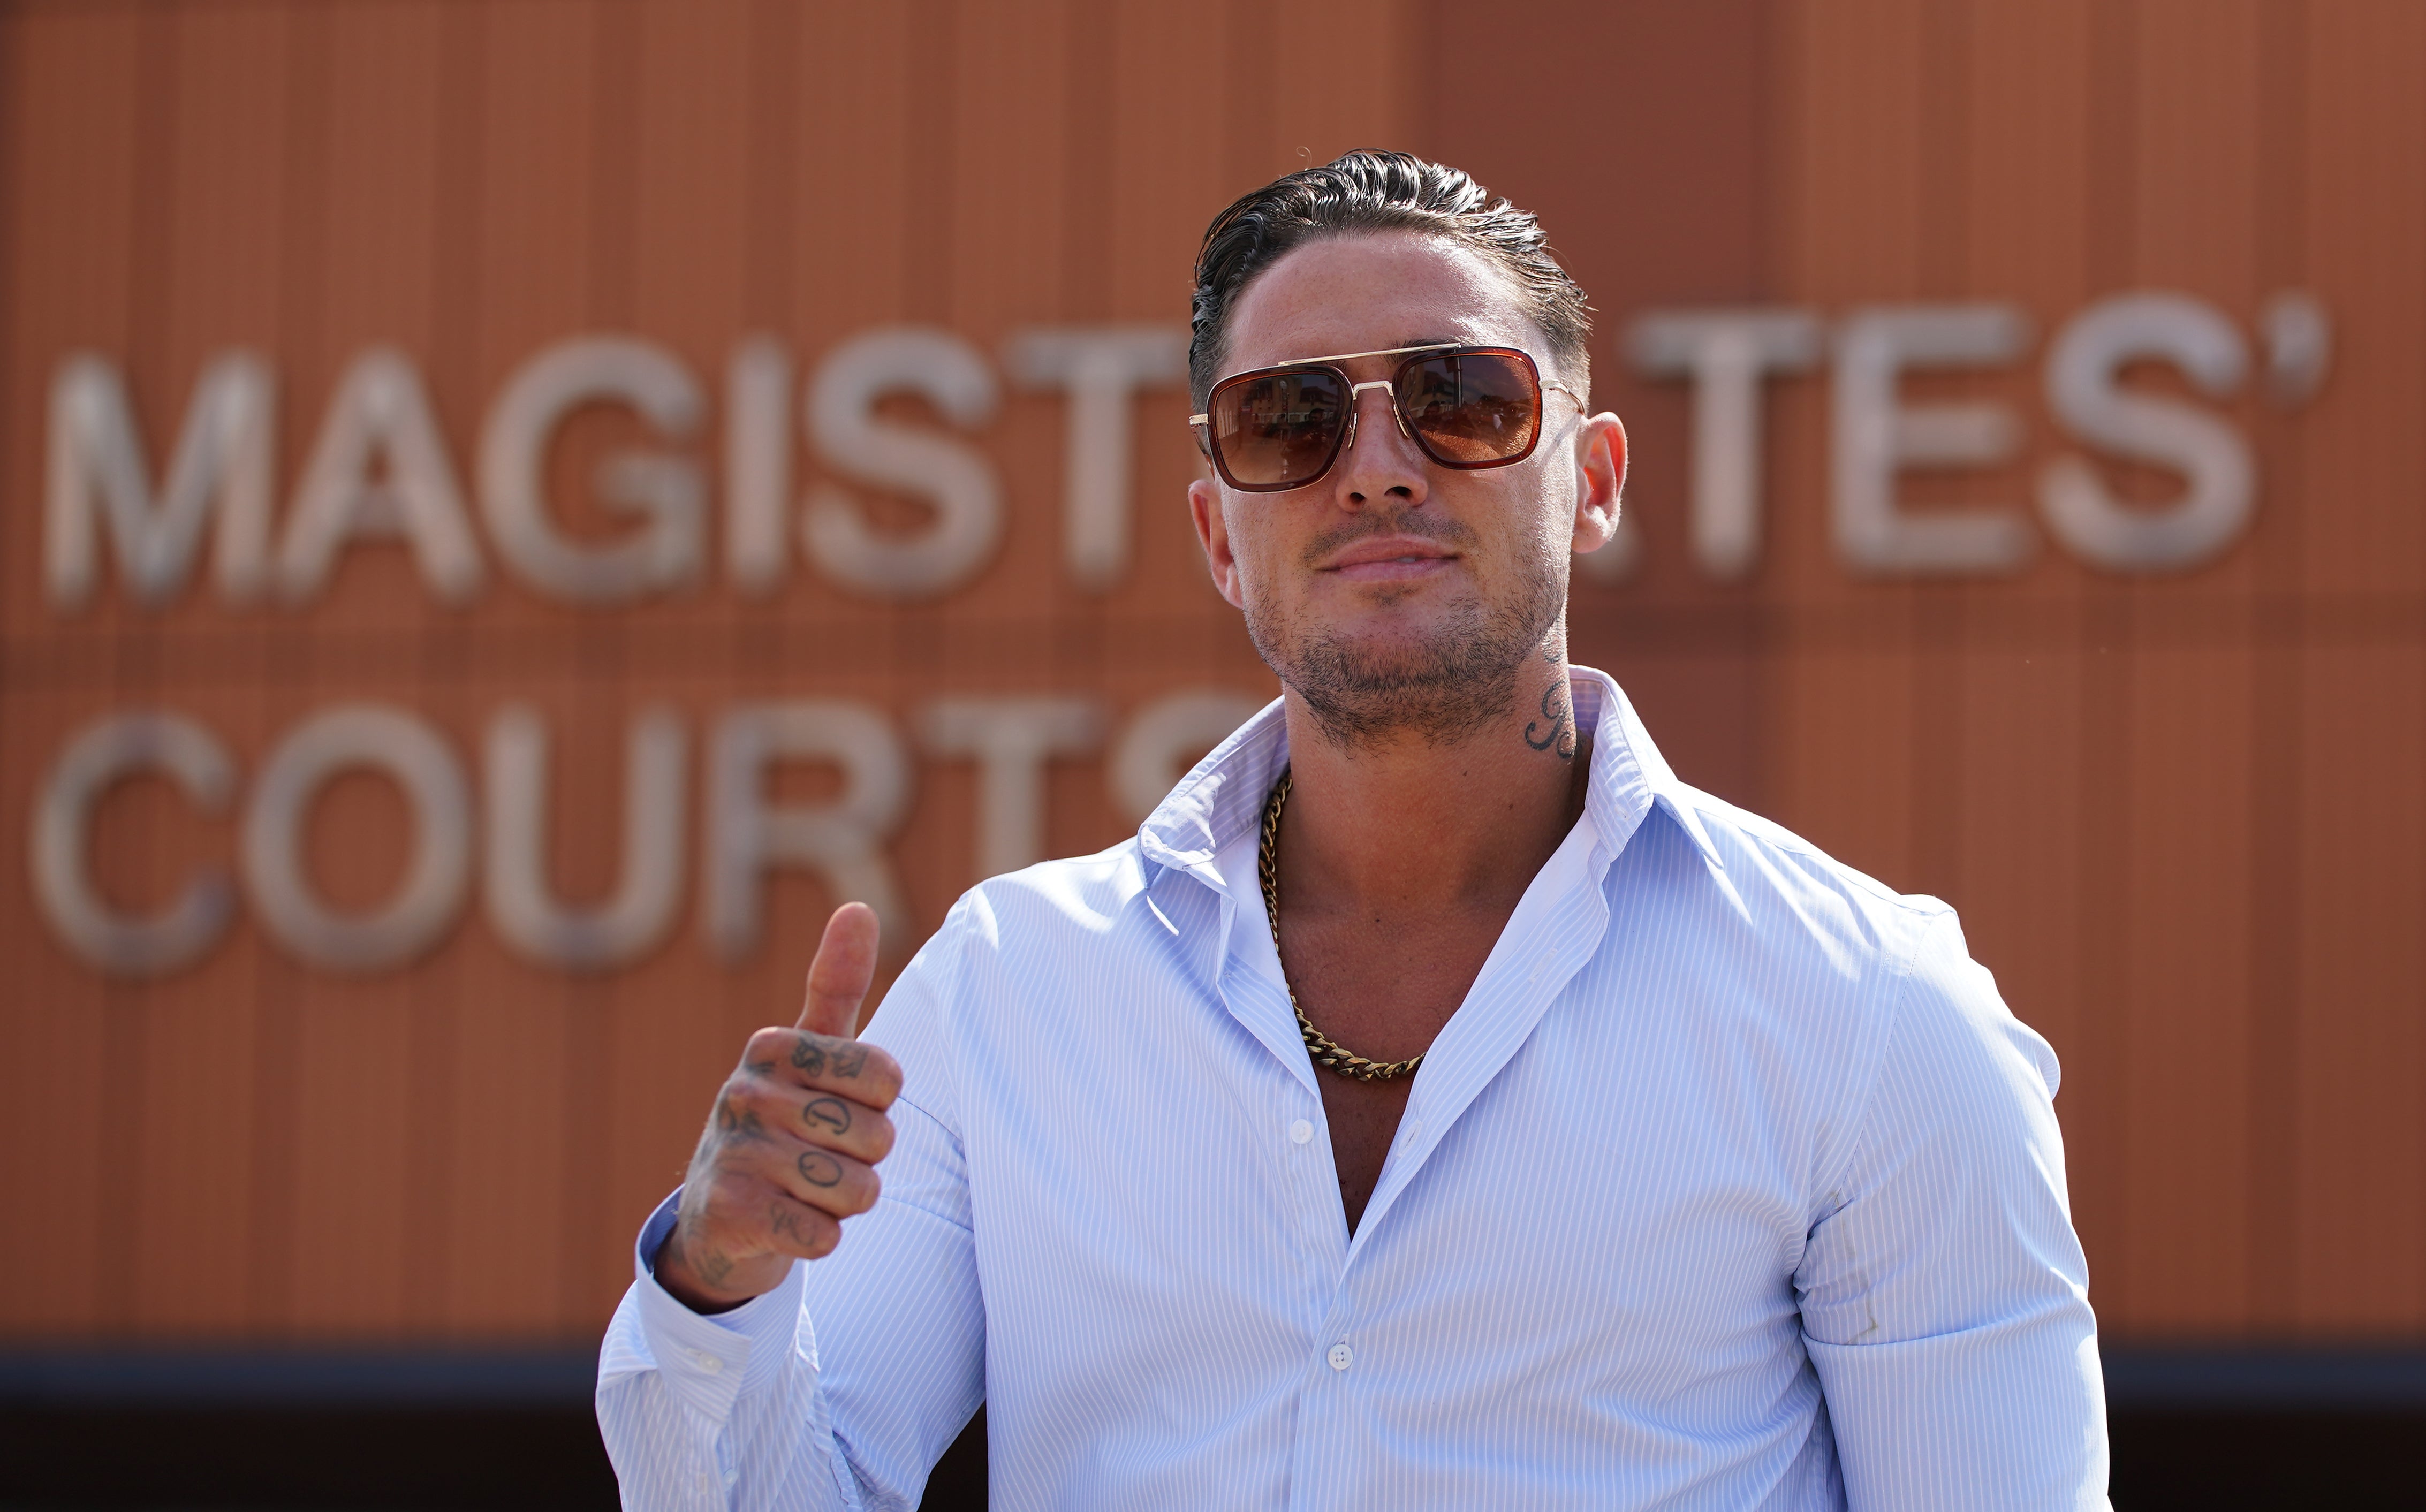 Stephen Sex Videos - Stephen Bear denies voyeurism and revenge porn charges | The Independent